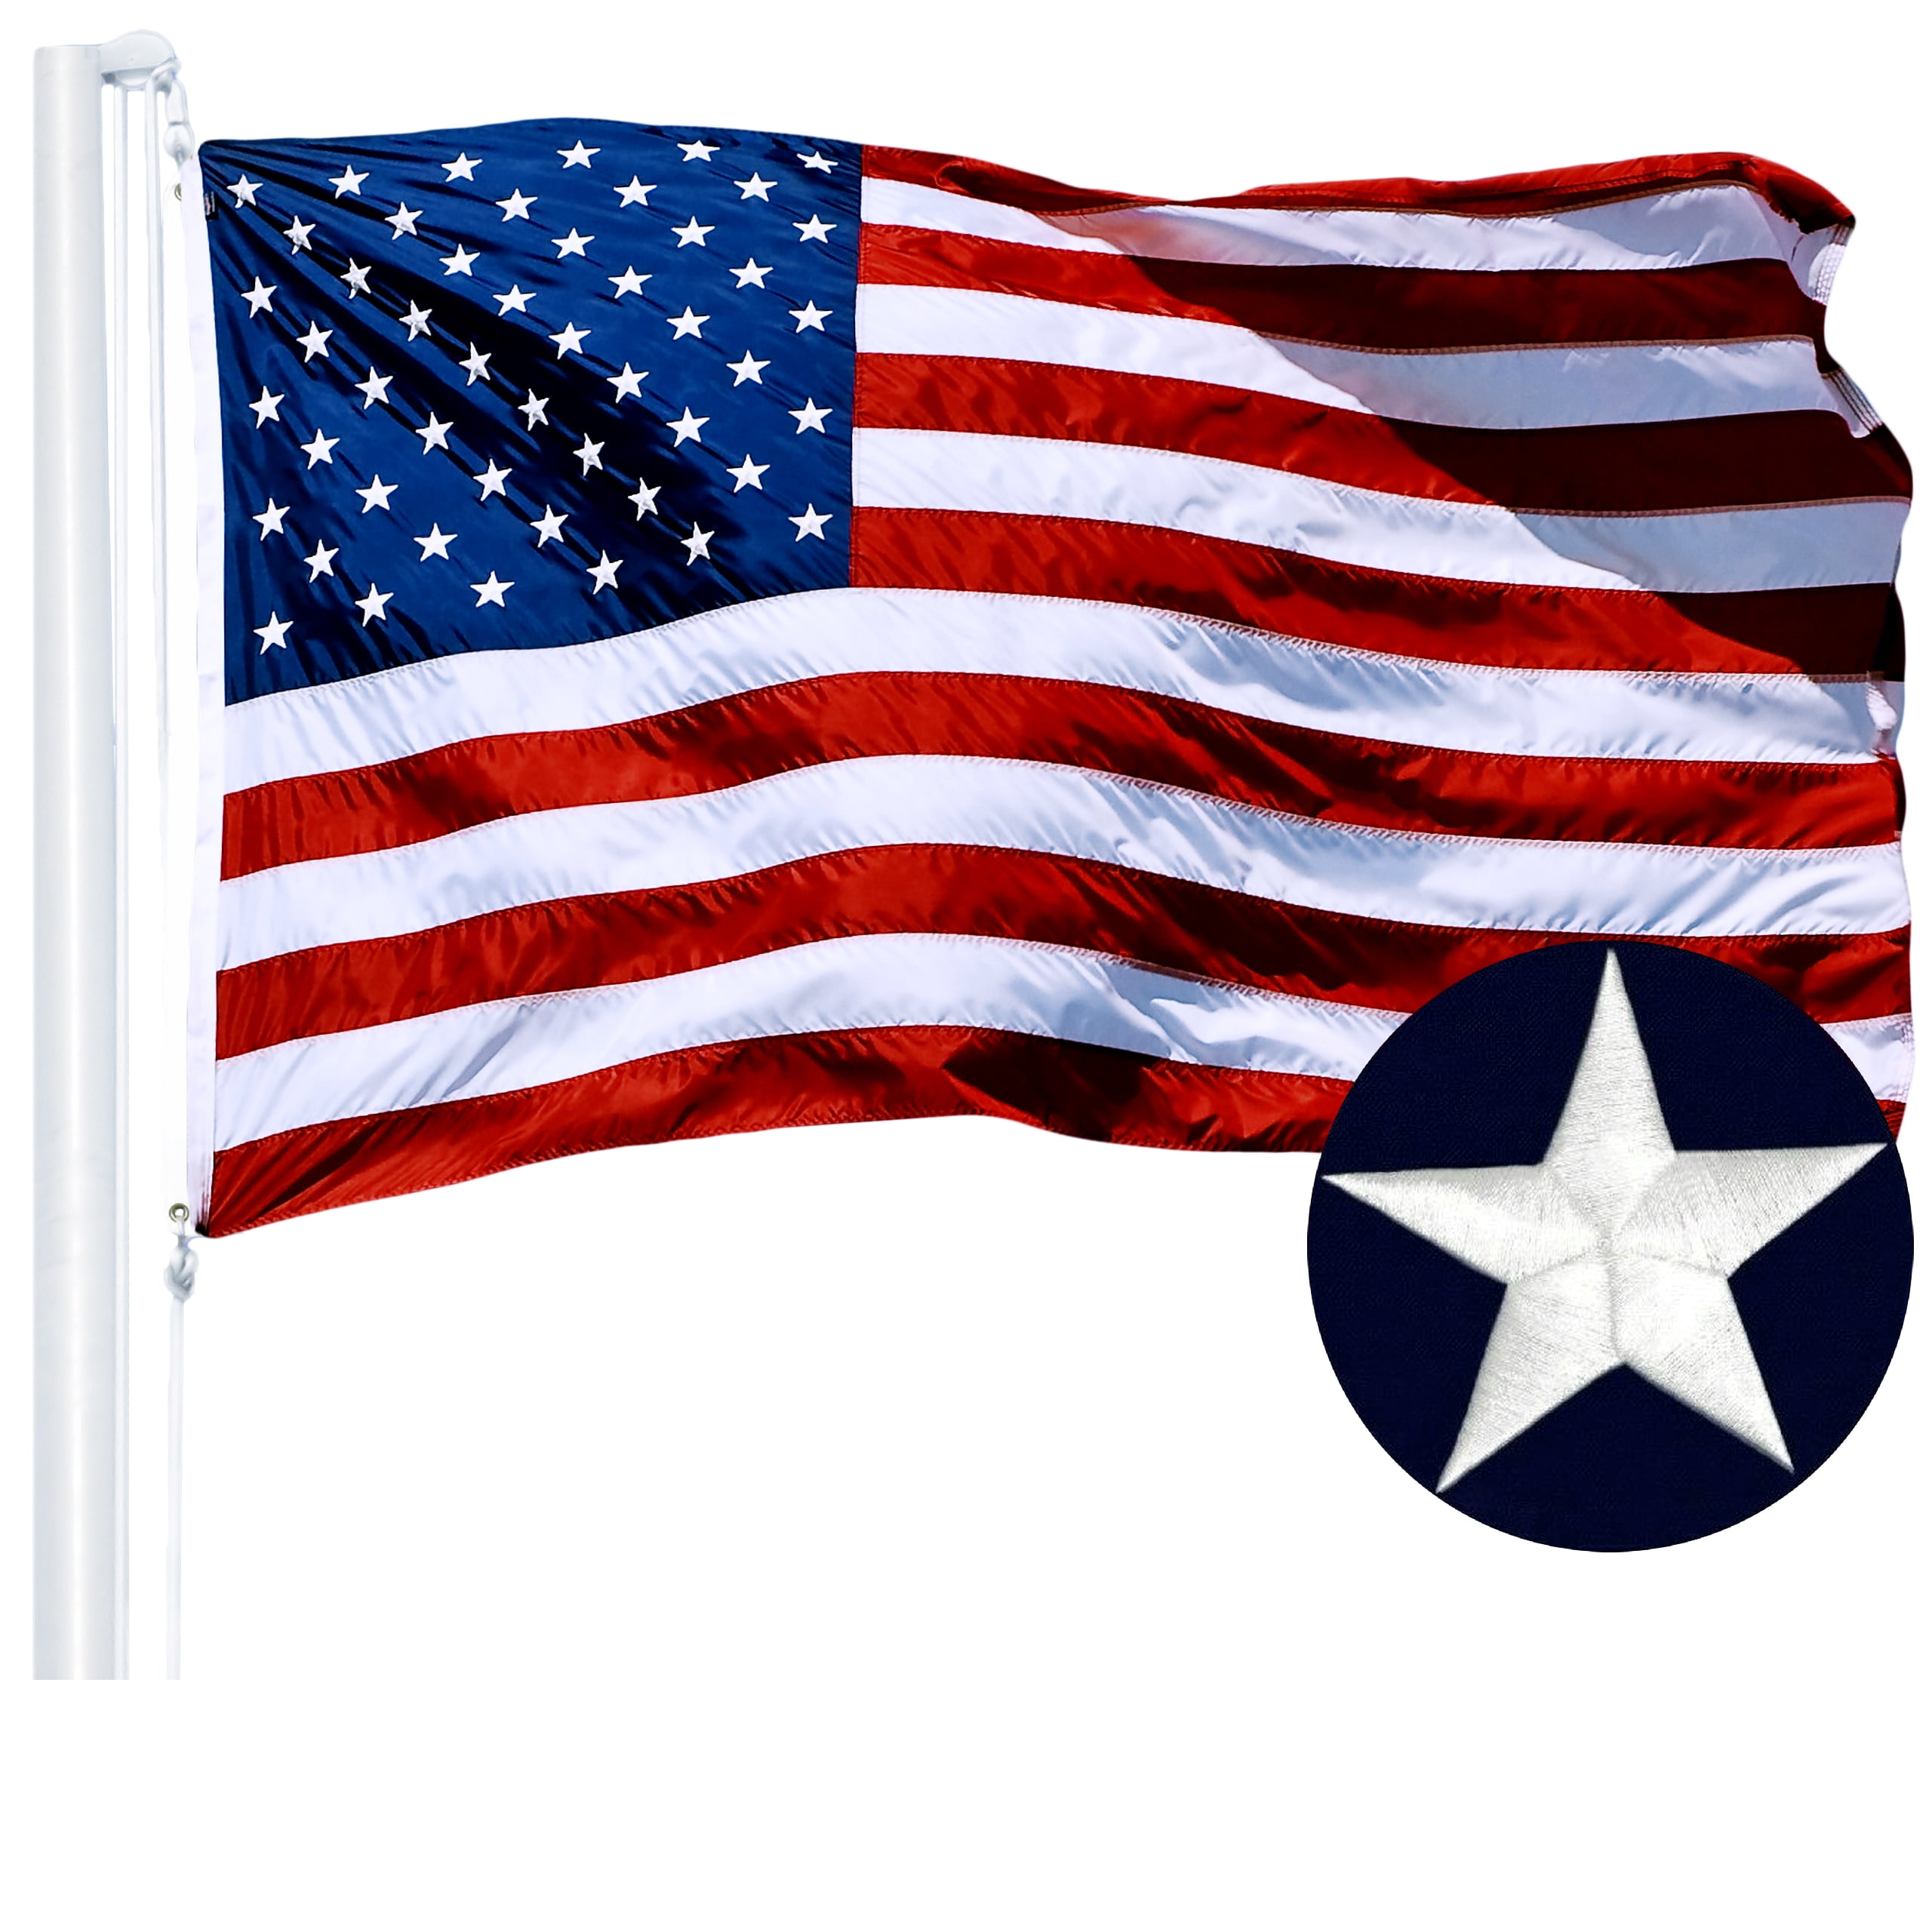 2x3 3x5 4x6 Texas State Flag 5'x8' foot banner grommets Rough Tex Waterproof USA 